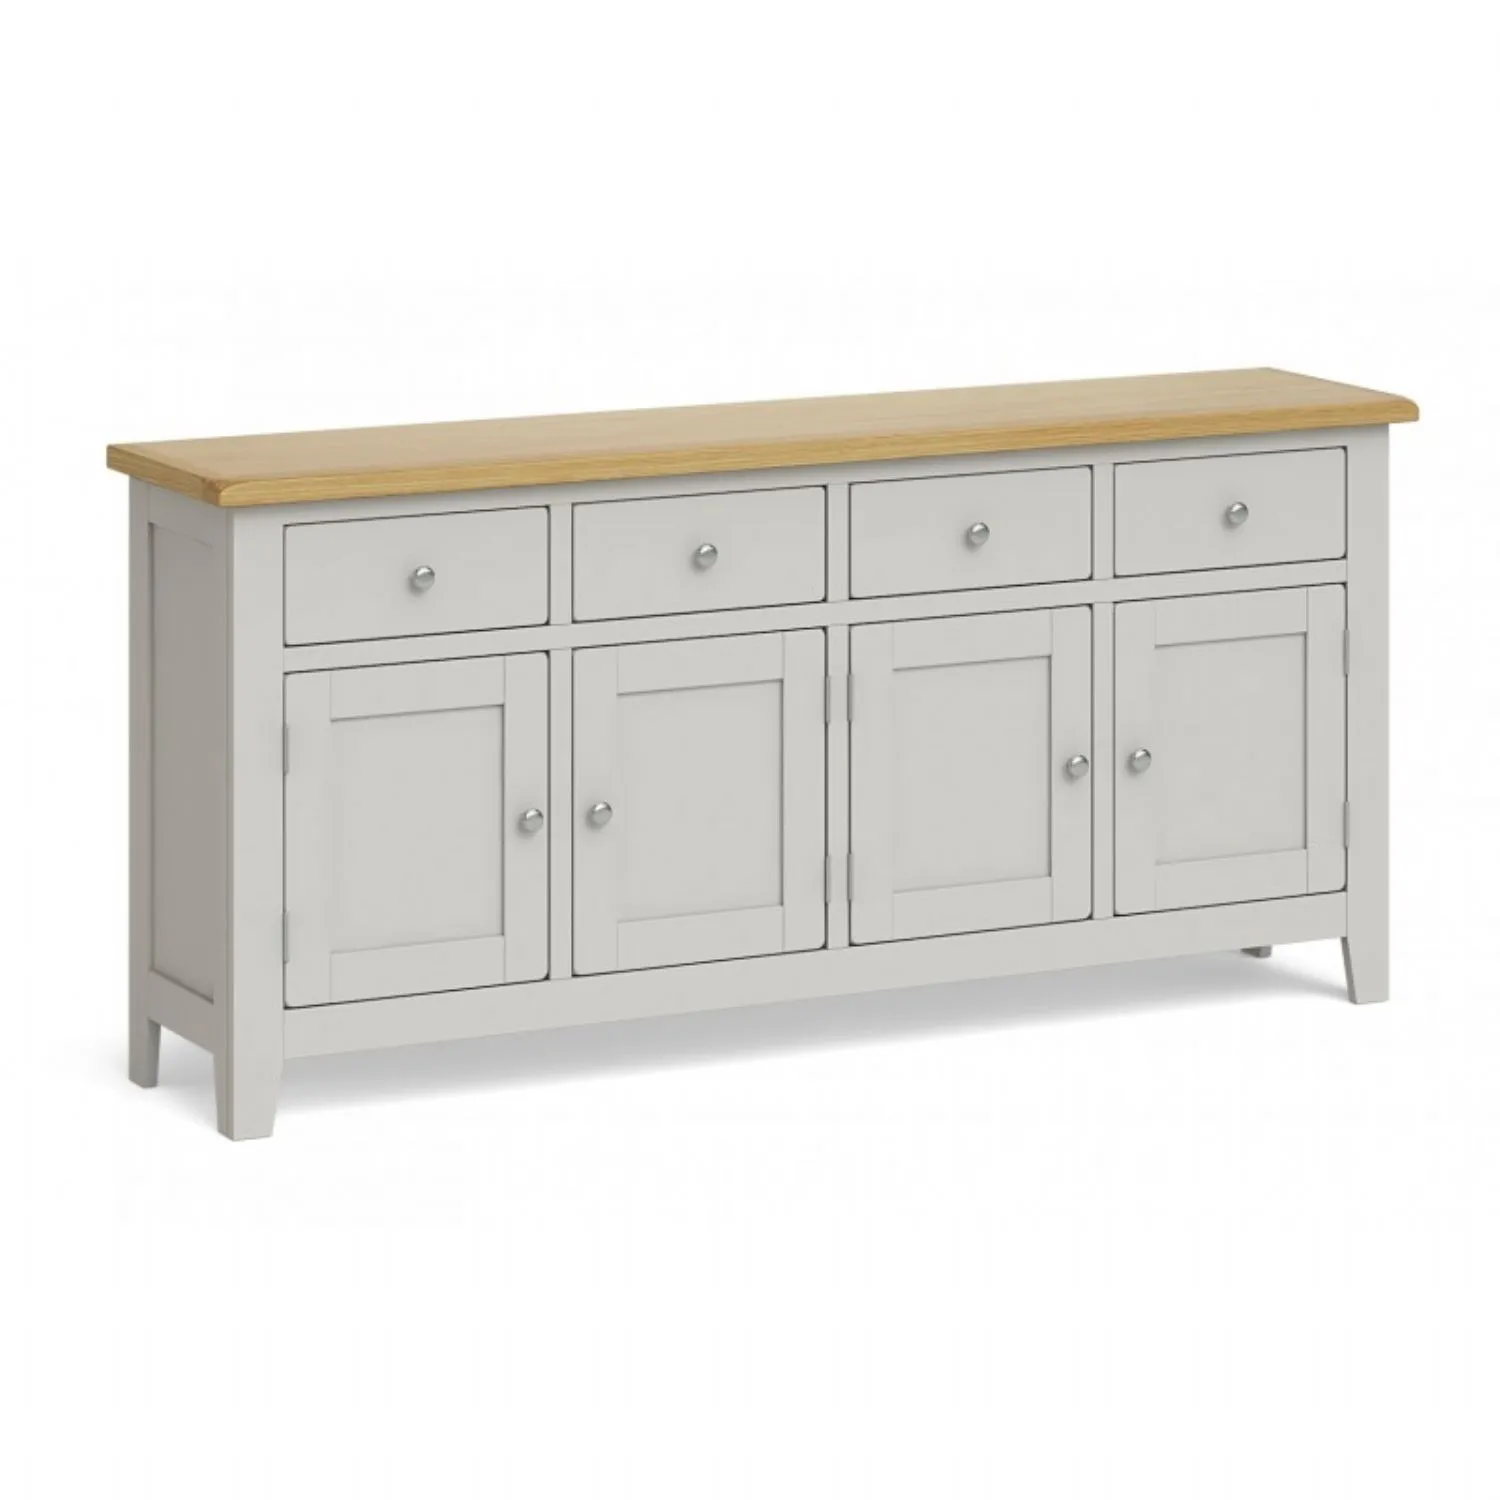 Solid Oak and Grey Painted 4 Door Extra Large Sideboard